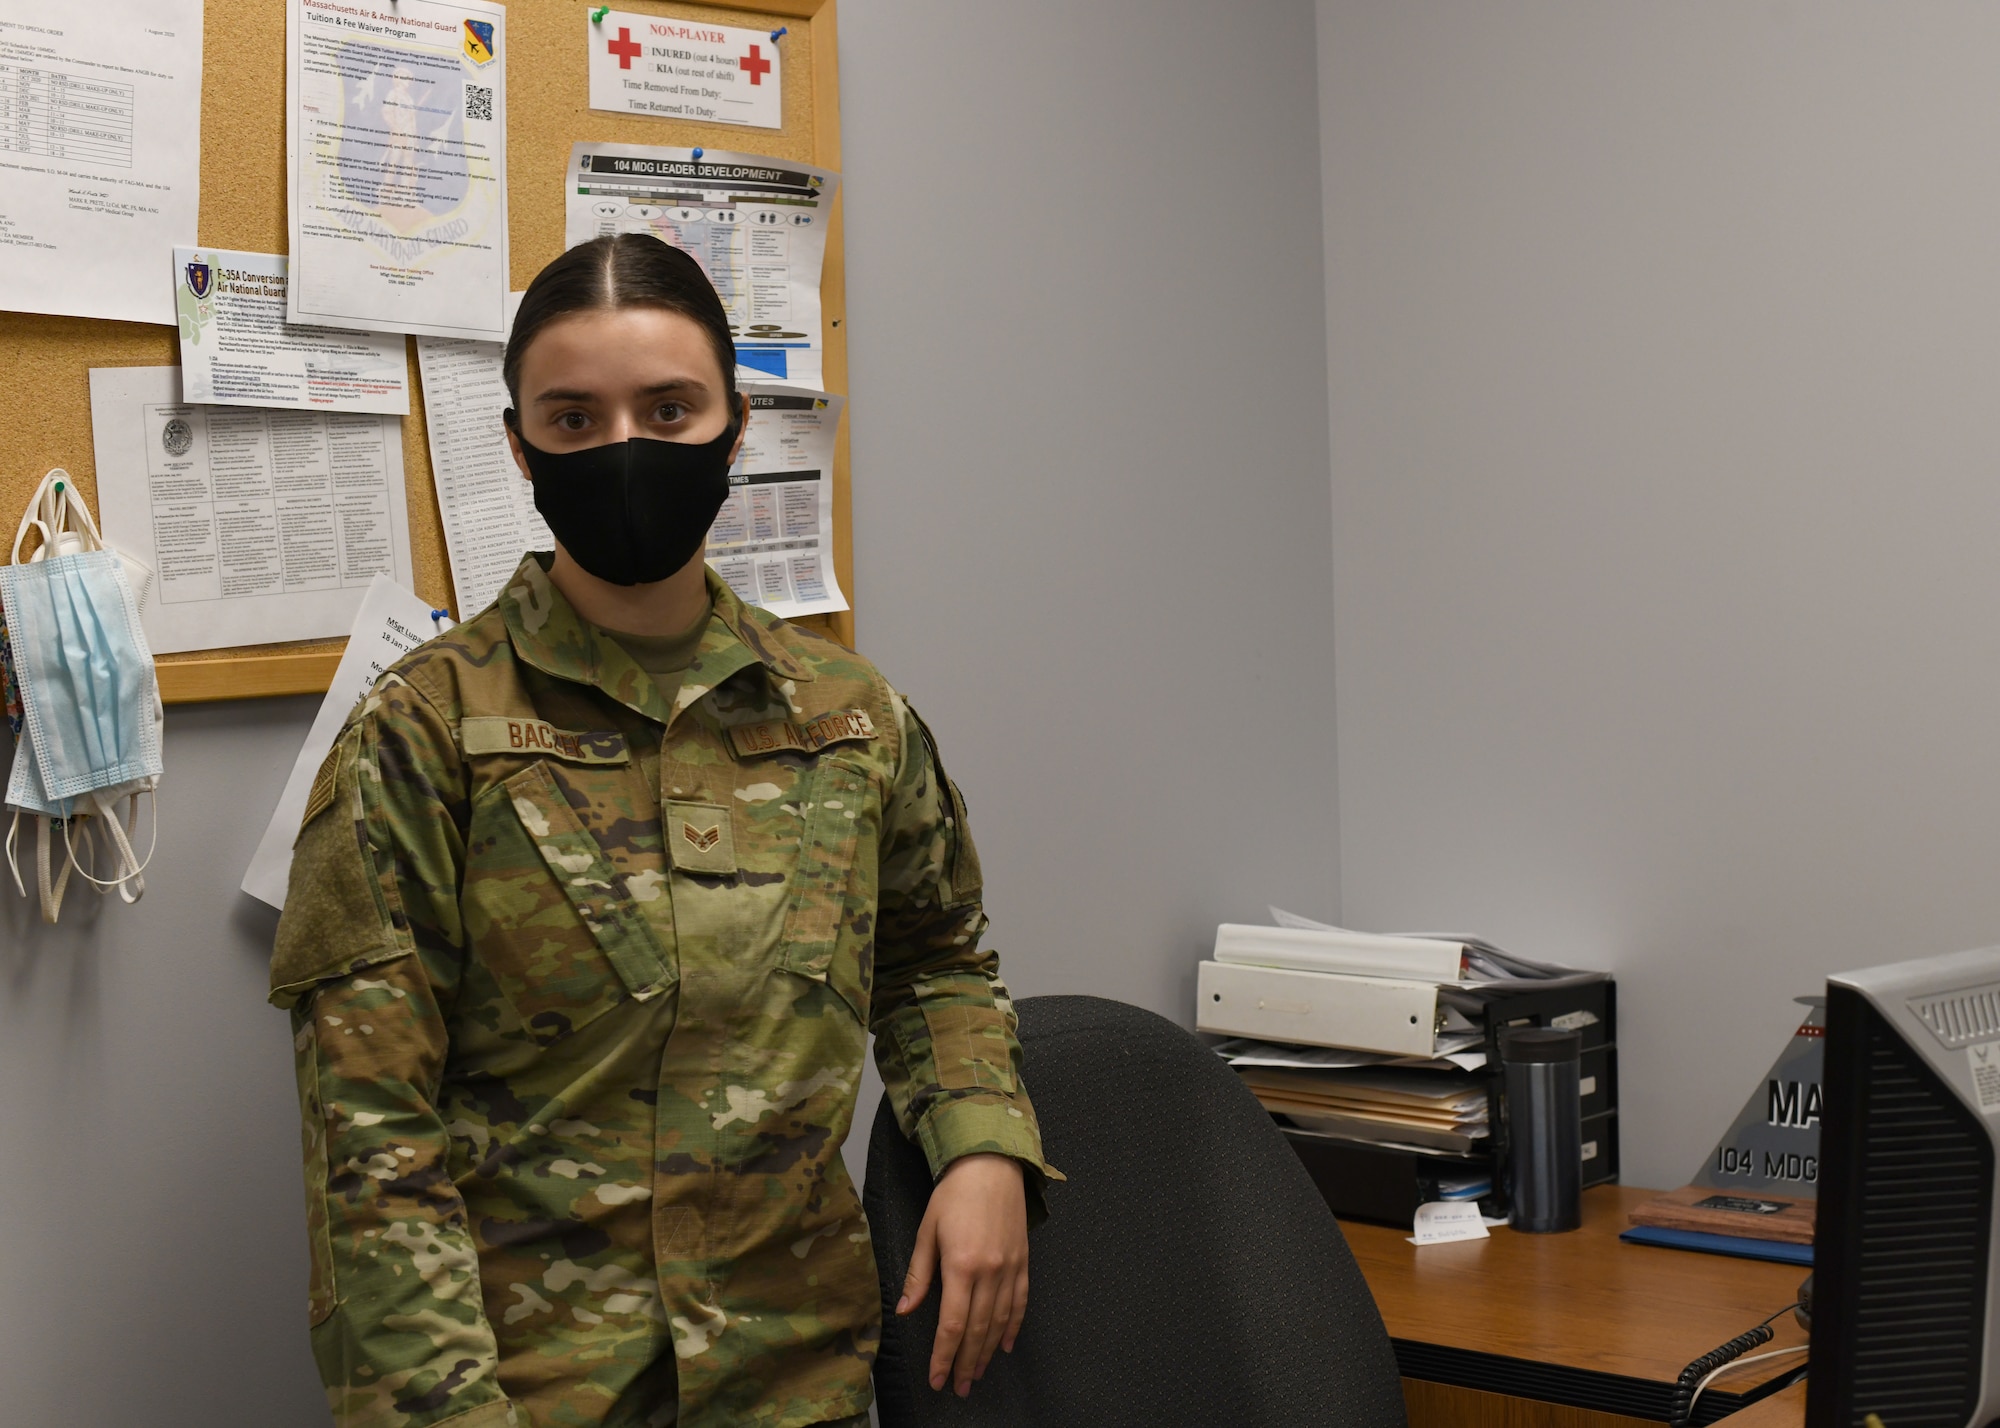 Senior Airman Weronika Baczek, public health technician, 104th Medical Group, poses for a photo, in her office at Barnes Air National Guard Base, Massachusetts, Feb. 17, 2021. Contact tracing is critical for safeguarding 104th Fighter Wing mission readiness and the health of our Barnestormers and surrounding communities from COVID-19. (U.S. Air National Guard courtesy photo)